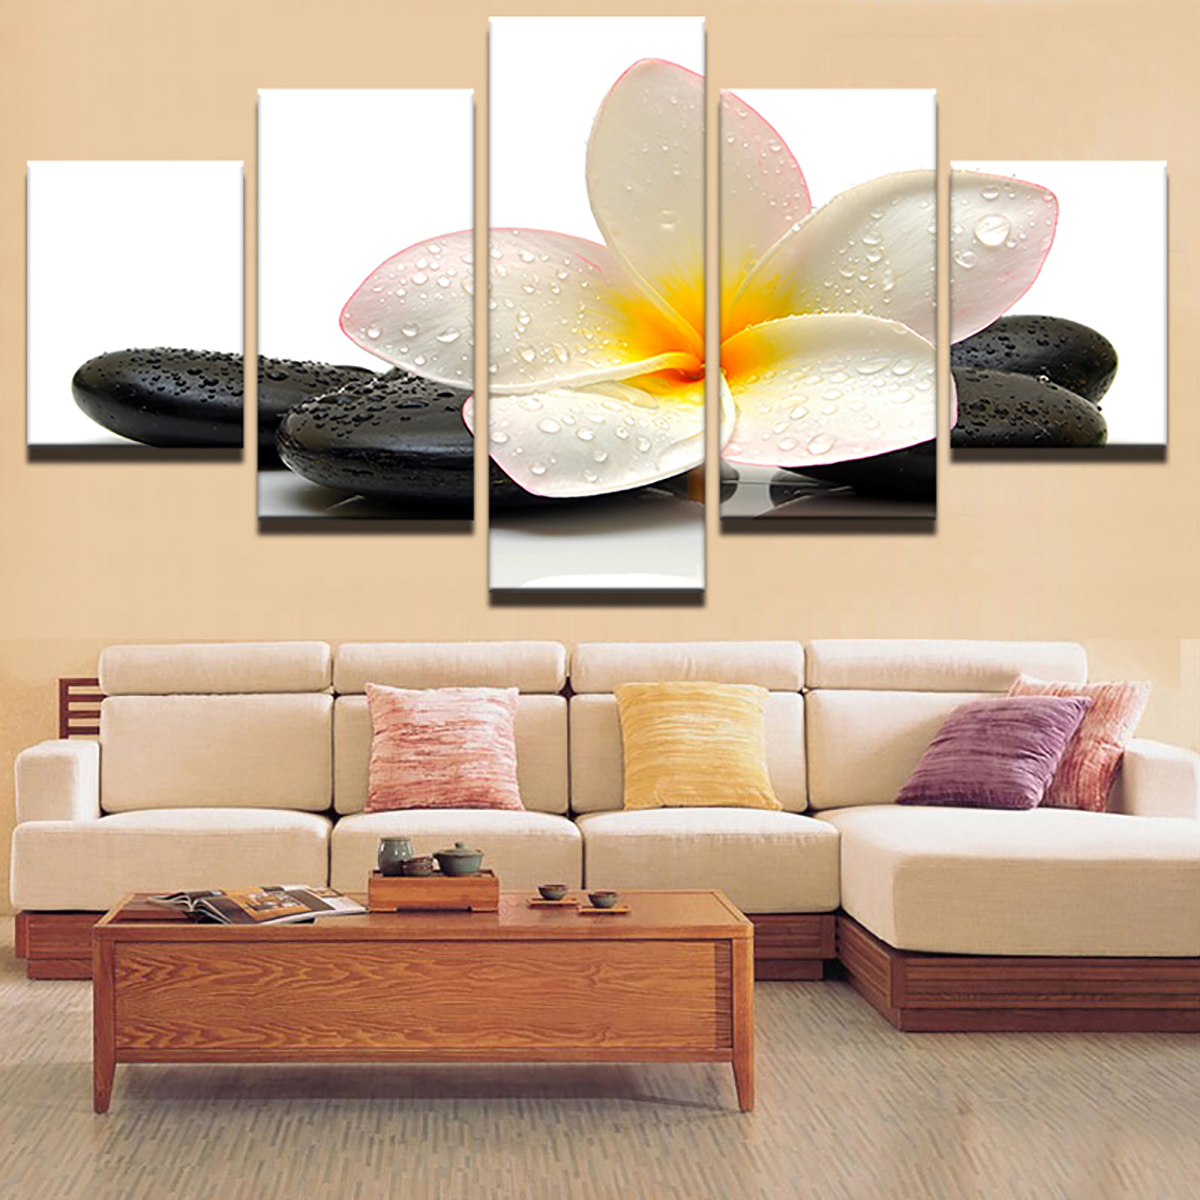 5Pcs-Canvas-Print-Paintings-Scenery-Oil-Painting-Wall-Decorative-Printing-Art-Picture-Frameless-Home-1758668-11